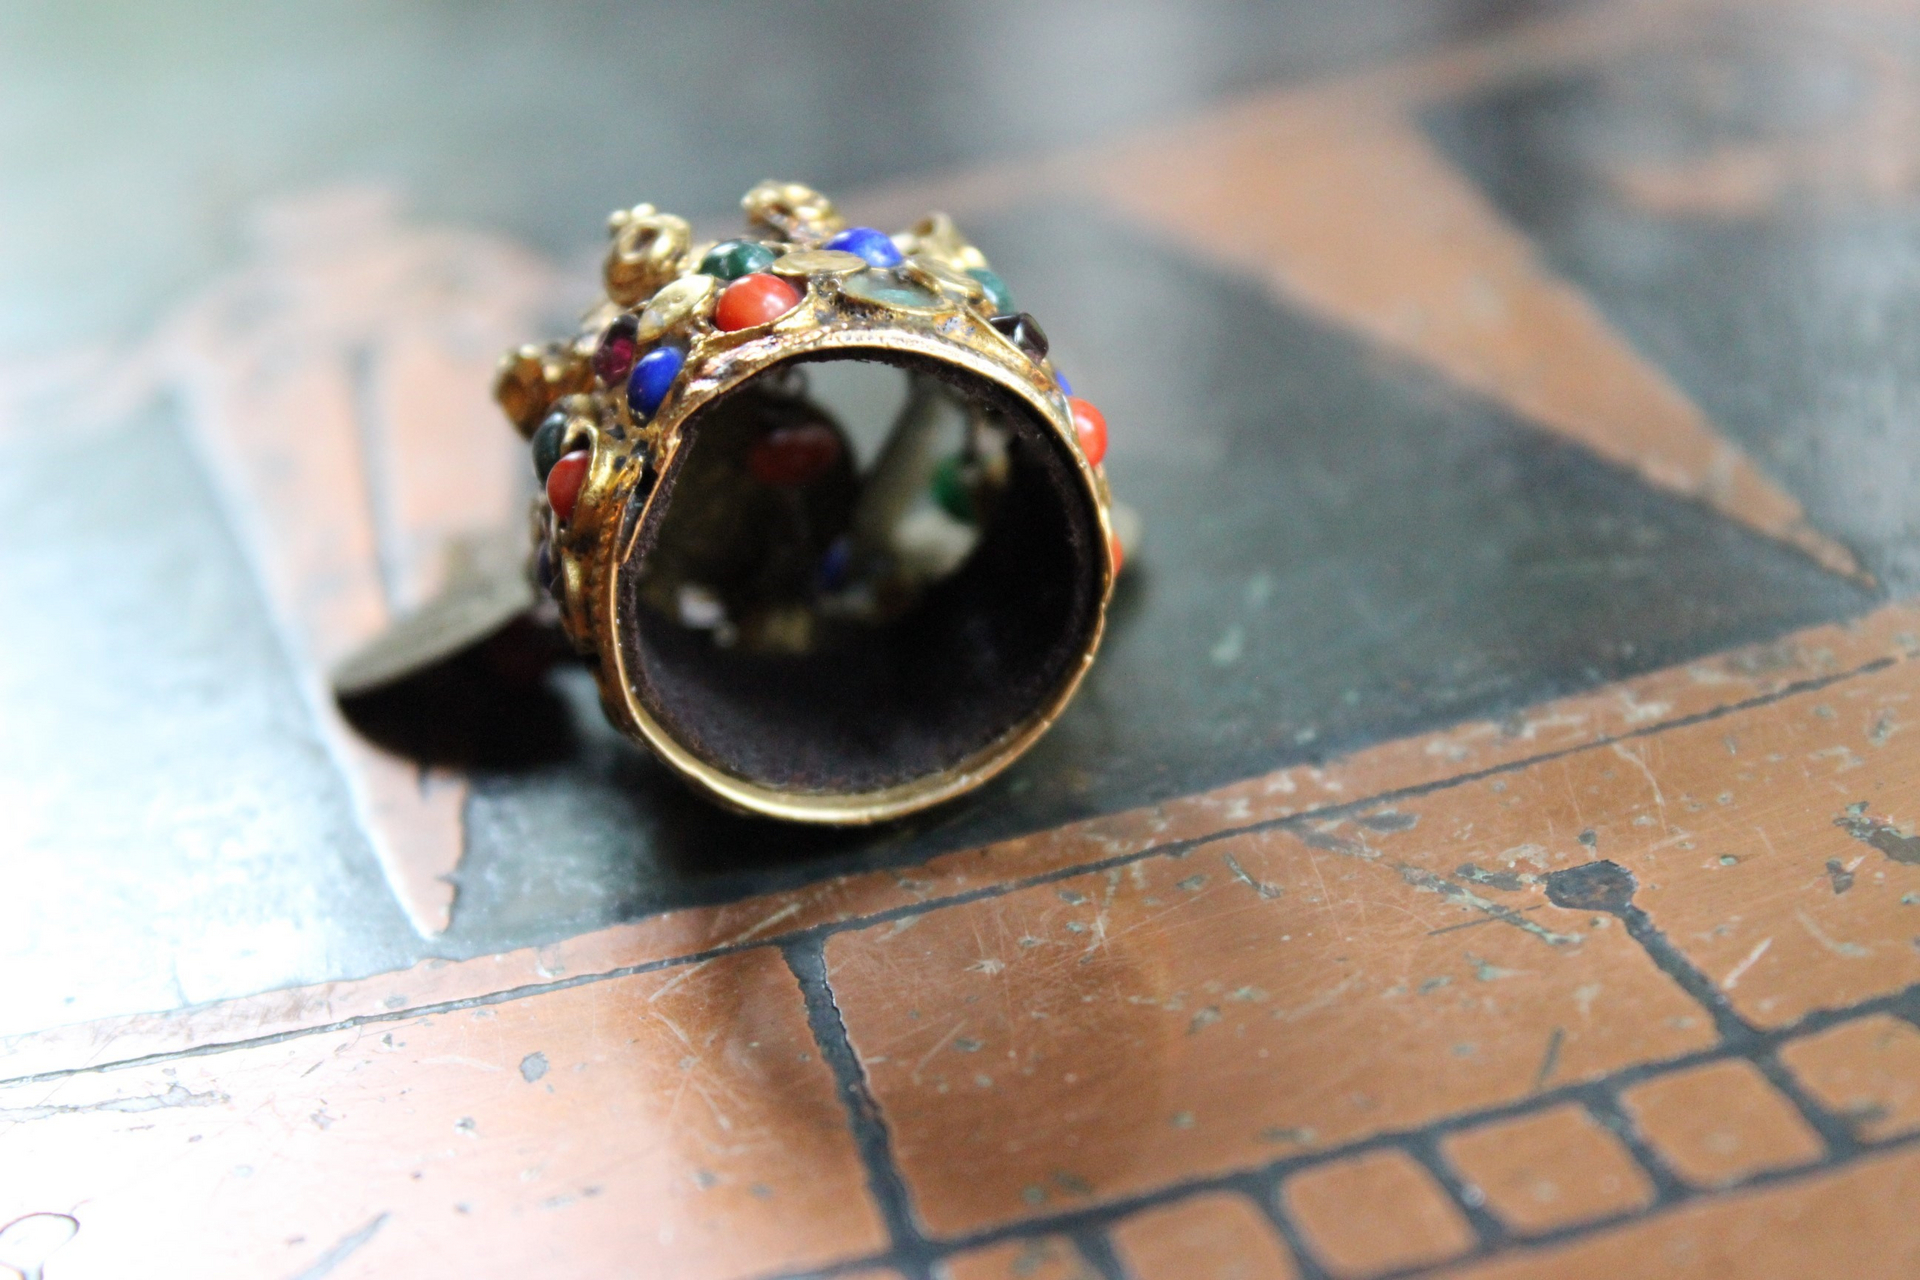 Amazing Antique Kuchi Gypsy Gold Ring w/Antique French Medals,Tiny Gypsy Bead and Heart Drops